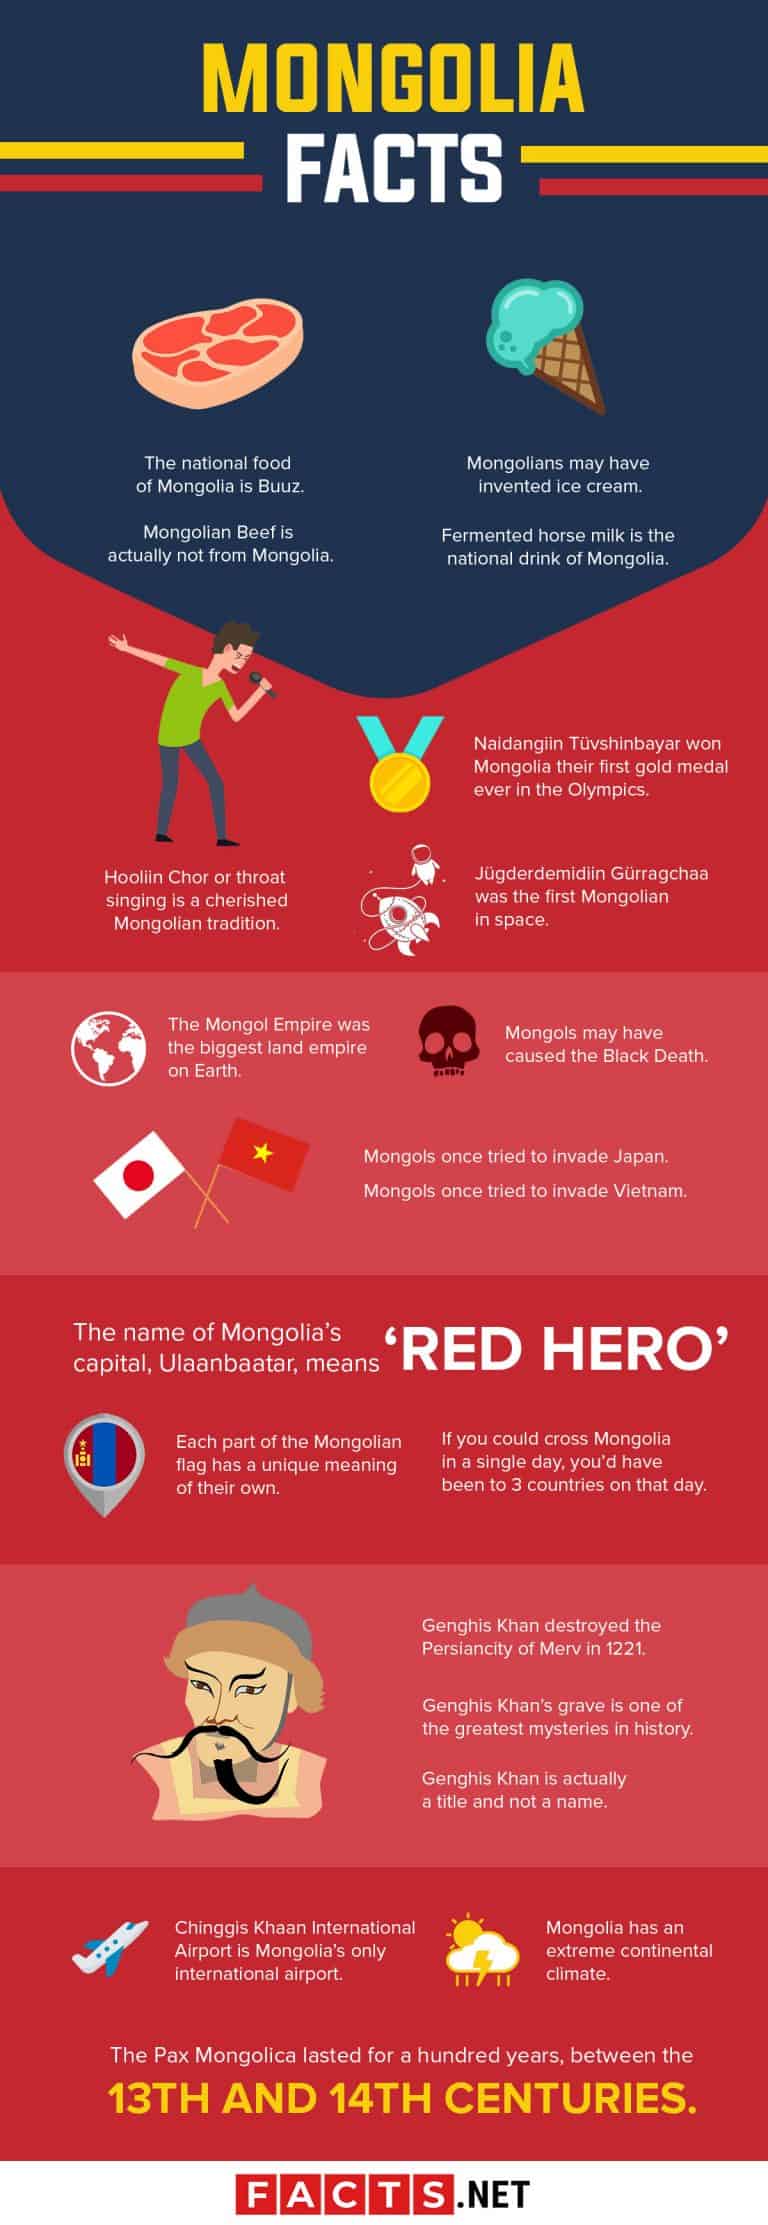 Mongolia Facts The Land Of The Eternal Blue Sky Facts Net